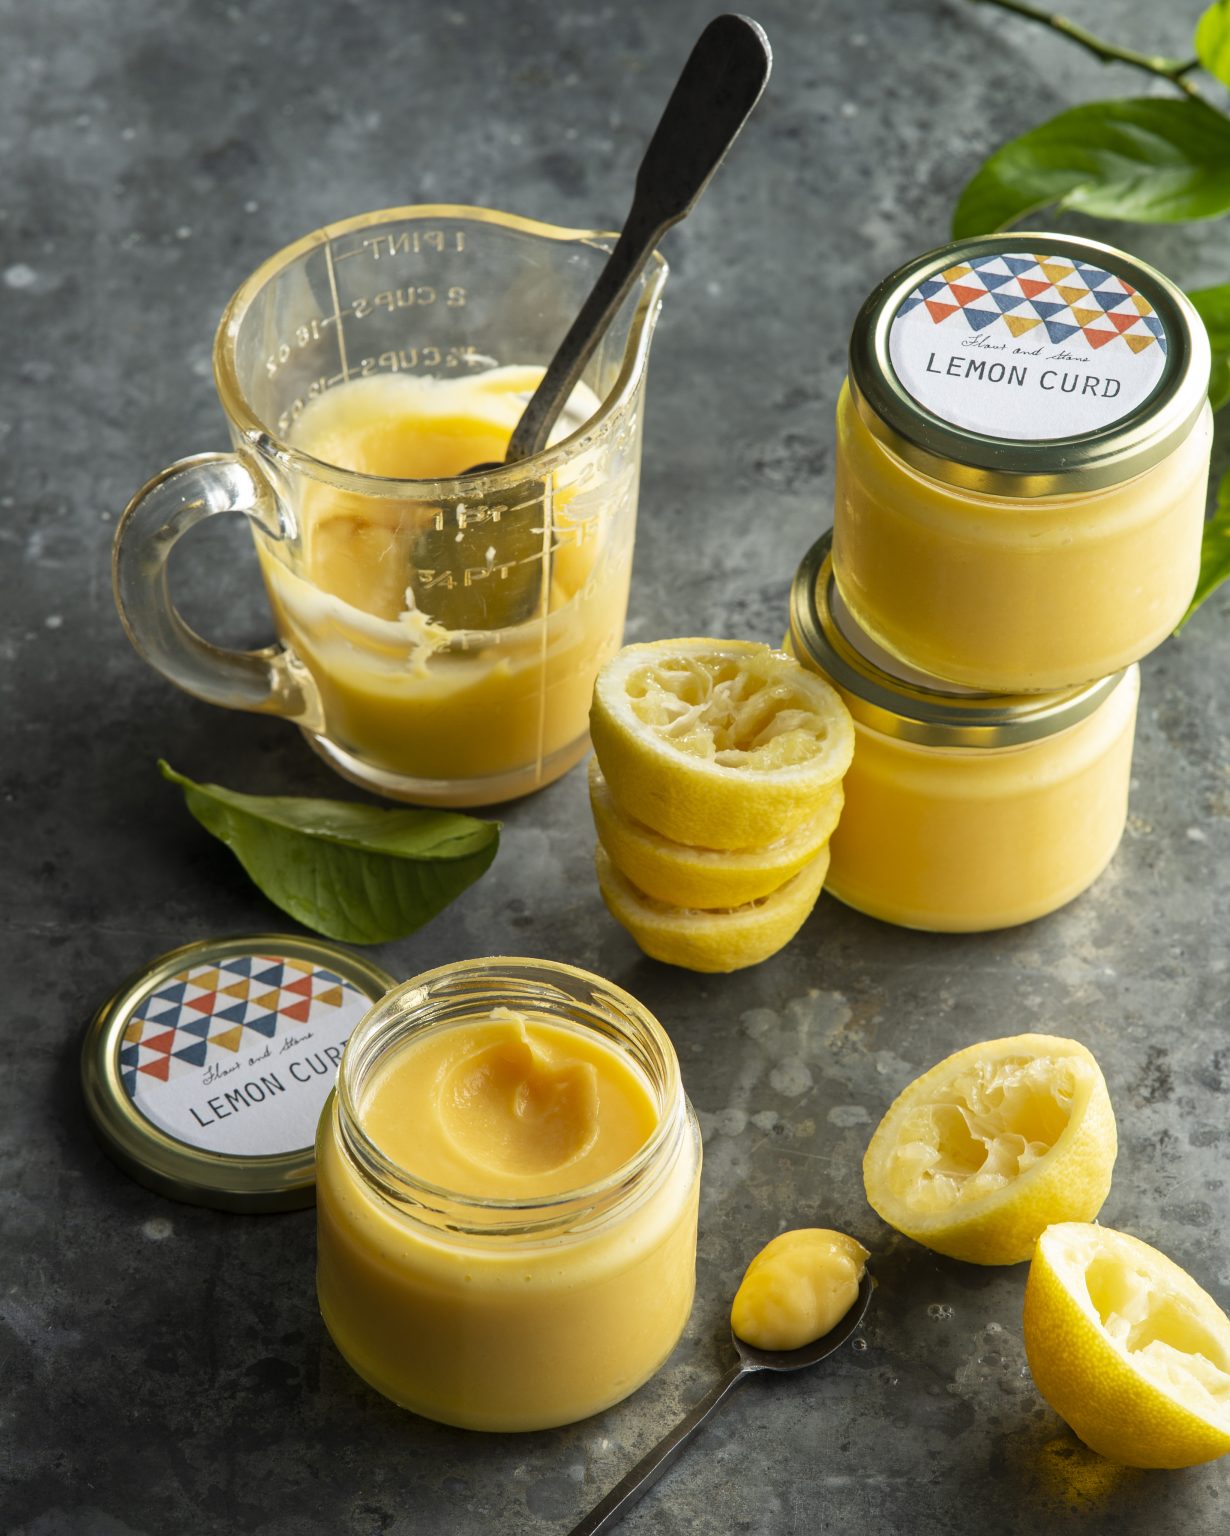 Lemon curd: Tangy and smooth spread made from zesty lemons.